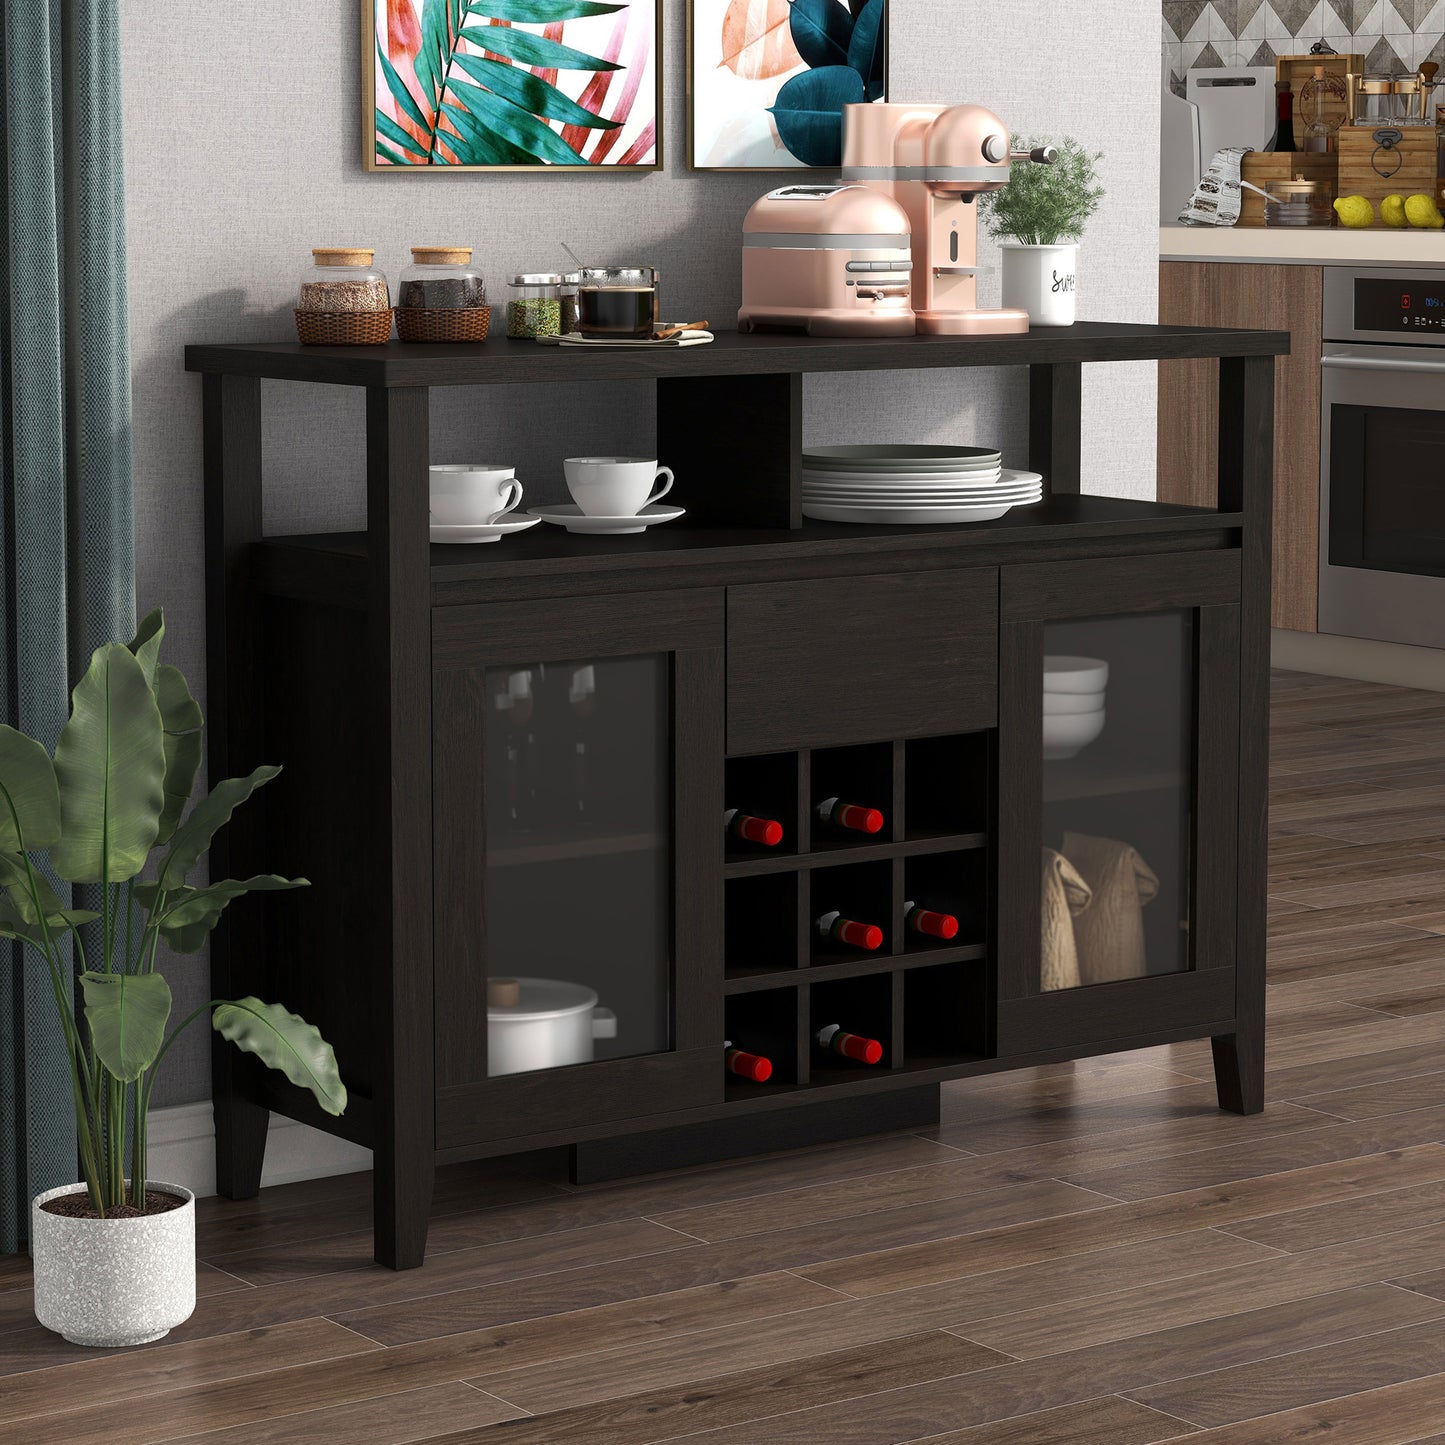 Right angled transitional espresso nine-bottle storage buffet with glass doors in a dining room with accessories